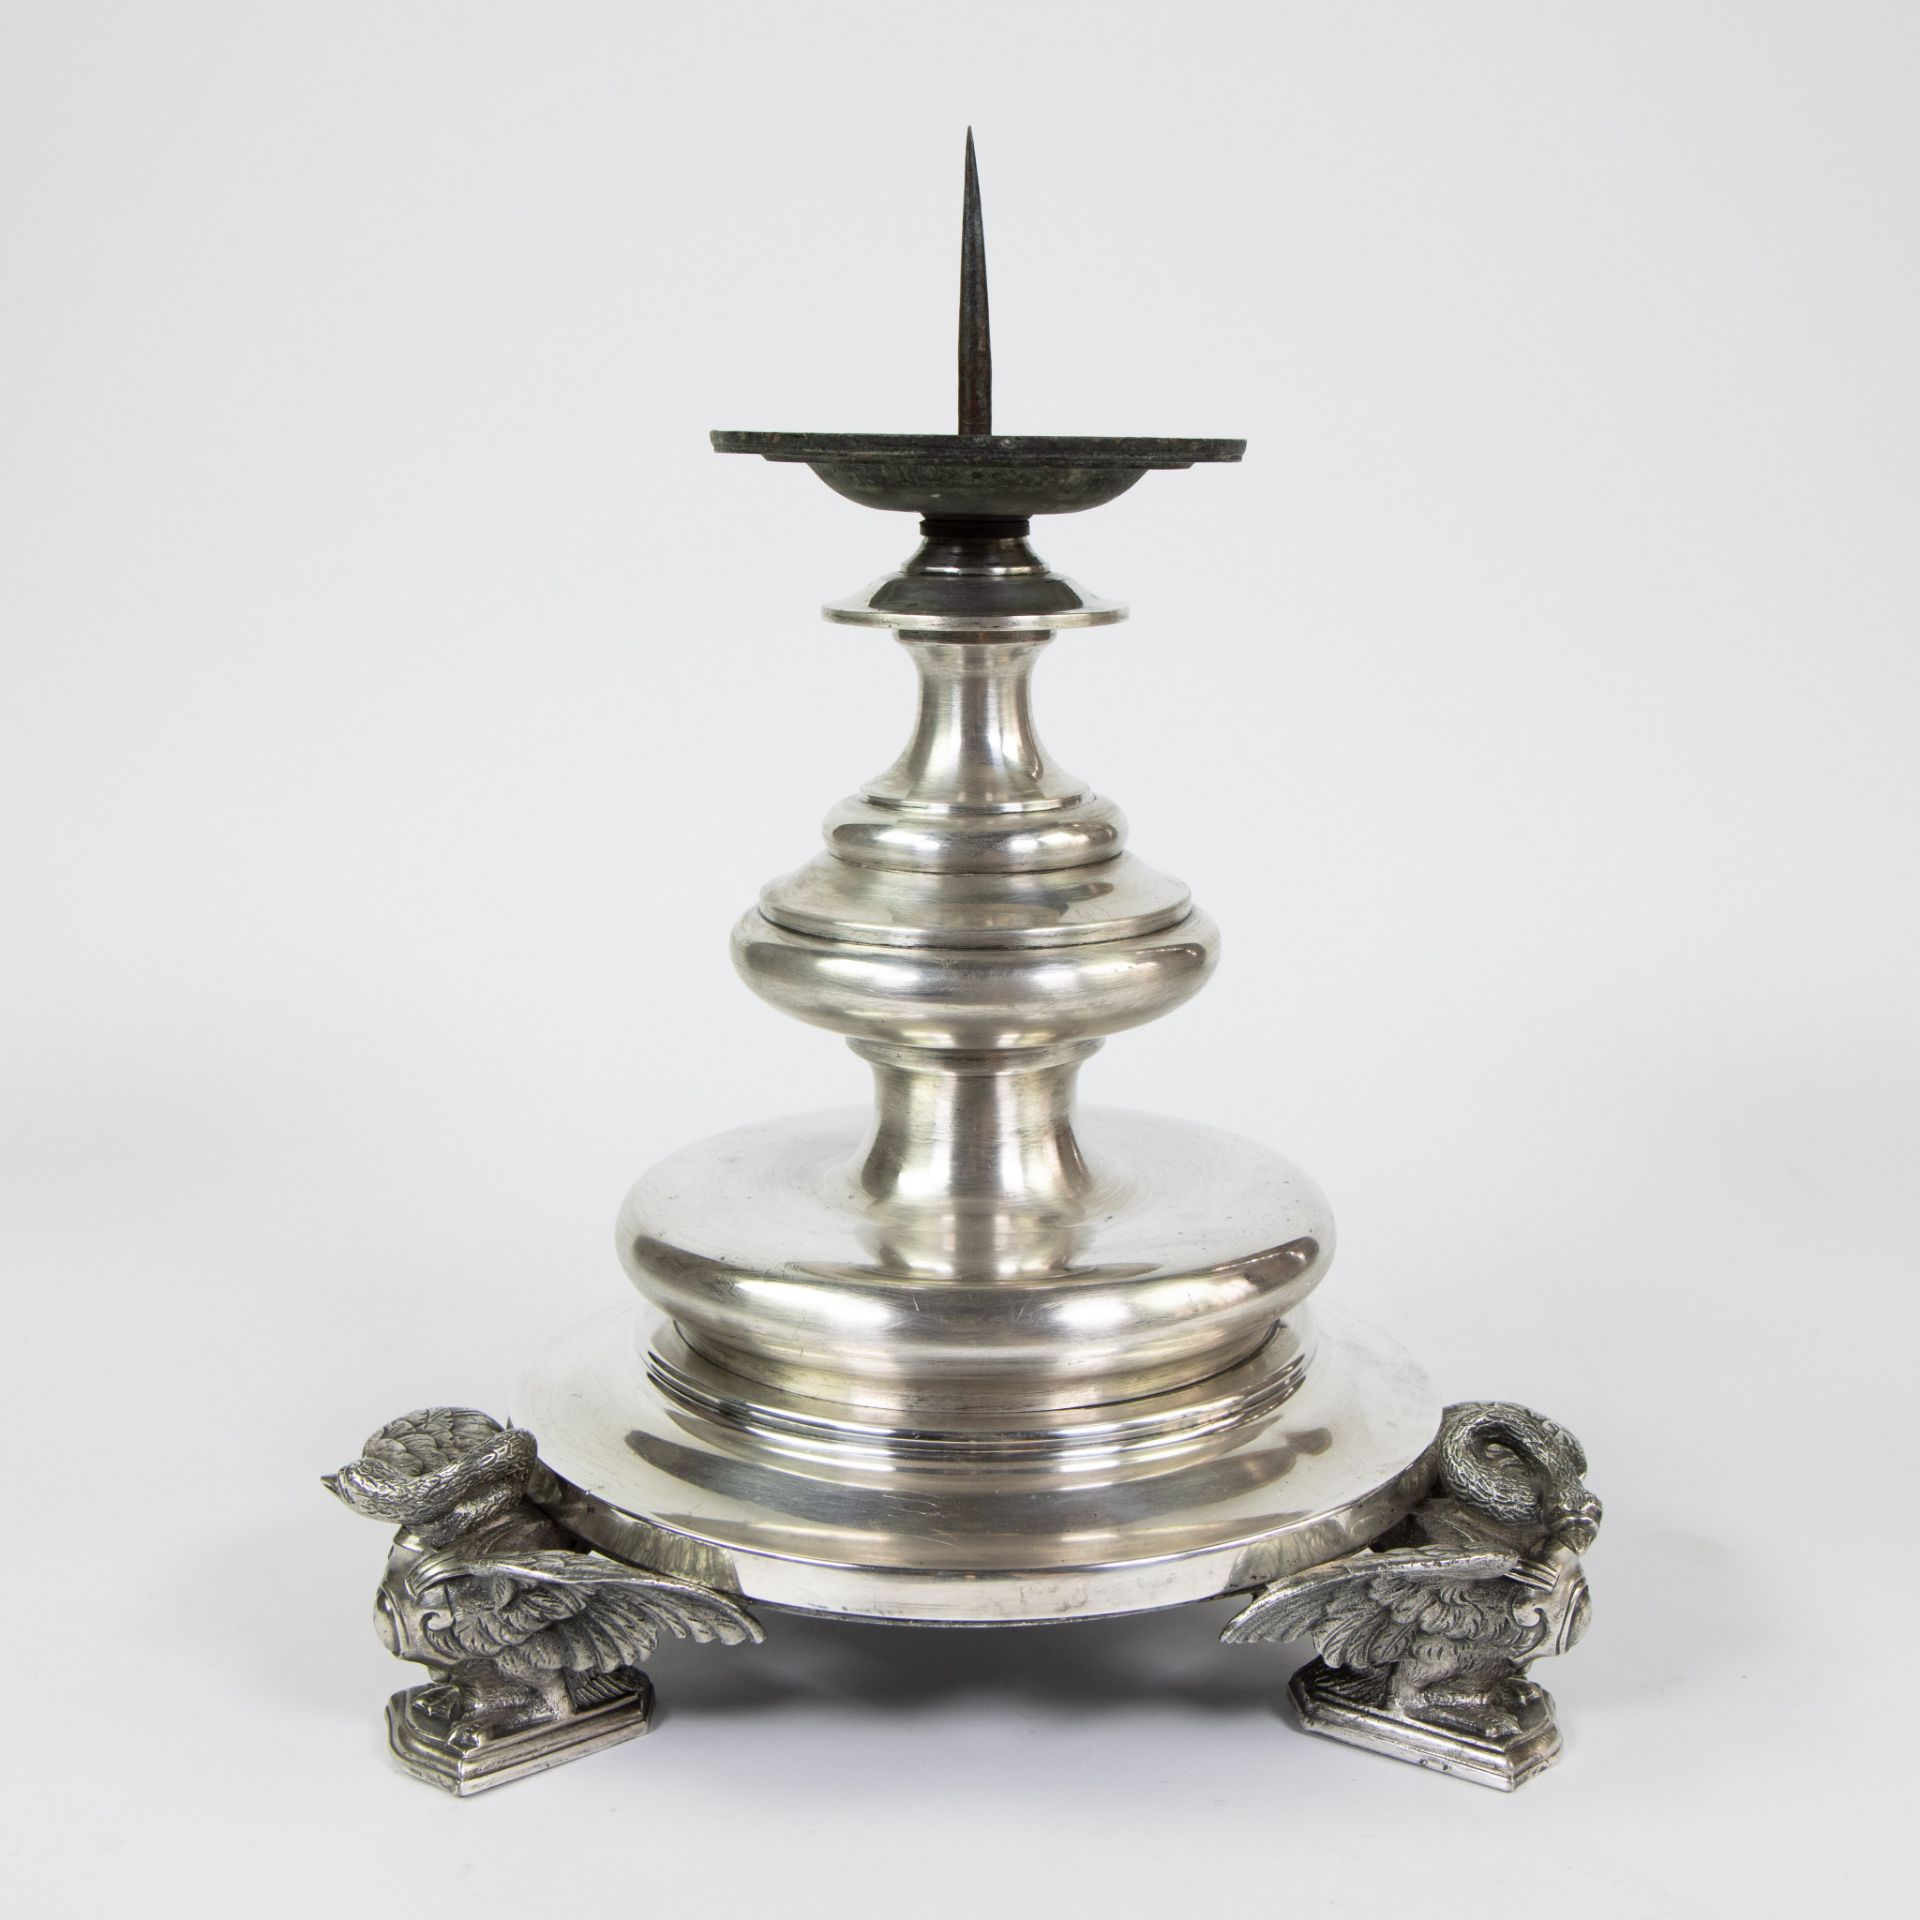 Silver plated candlestick with three swans as legs